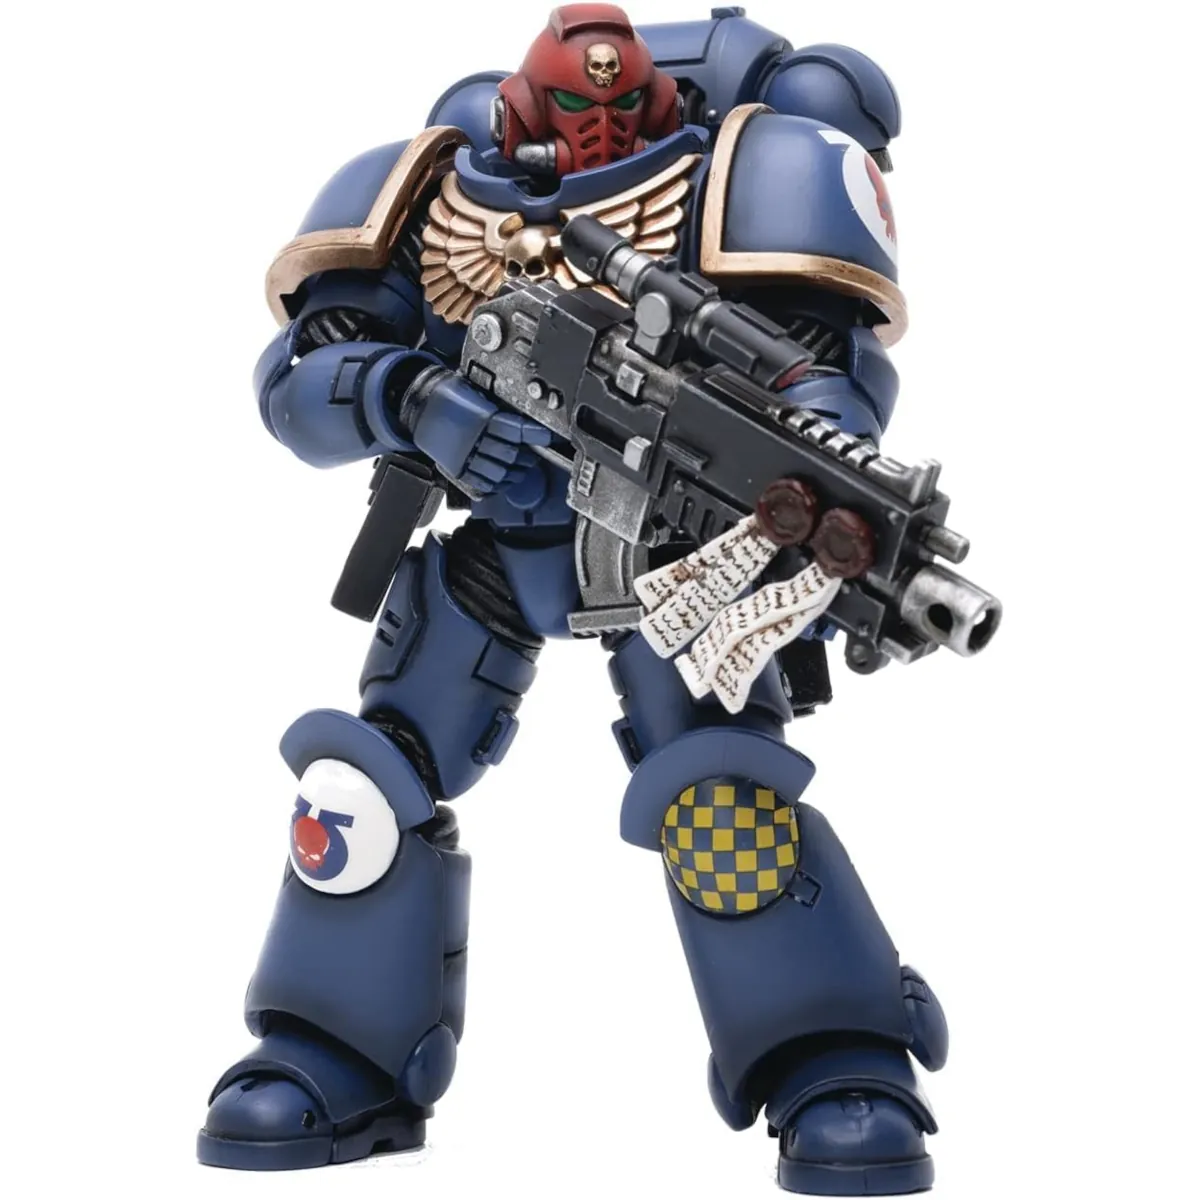 6973130372474 Warhammer 40K Ultramarines Heroes of the Chapter Brother Veteran Sergeant Castor 1-18 Scale Action Figure